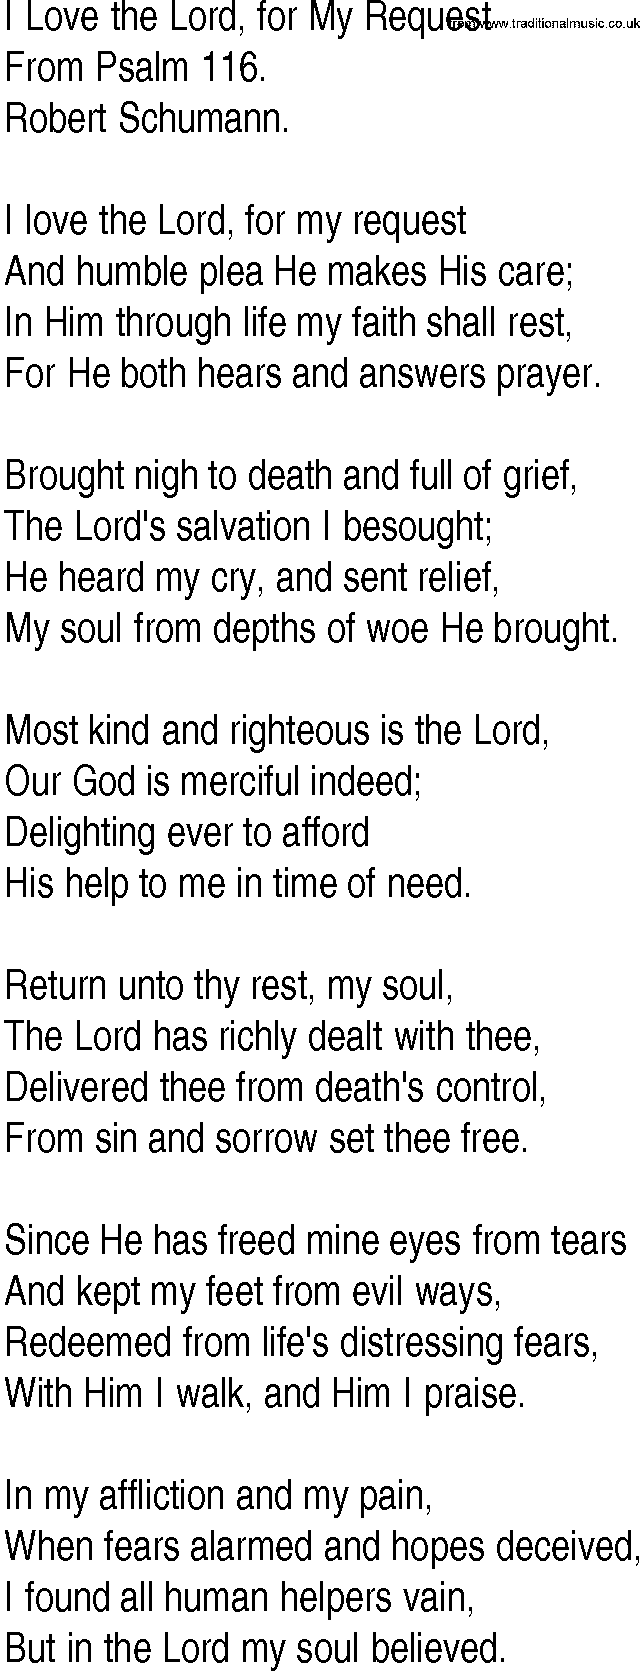 Hymn and Gospel Song: I Love the Lord, for My Request by From Psalm lyrics